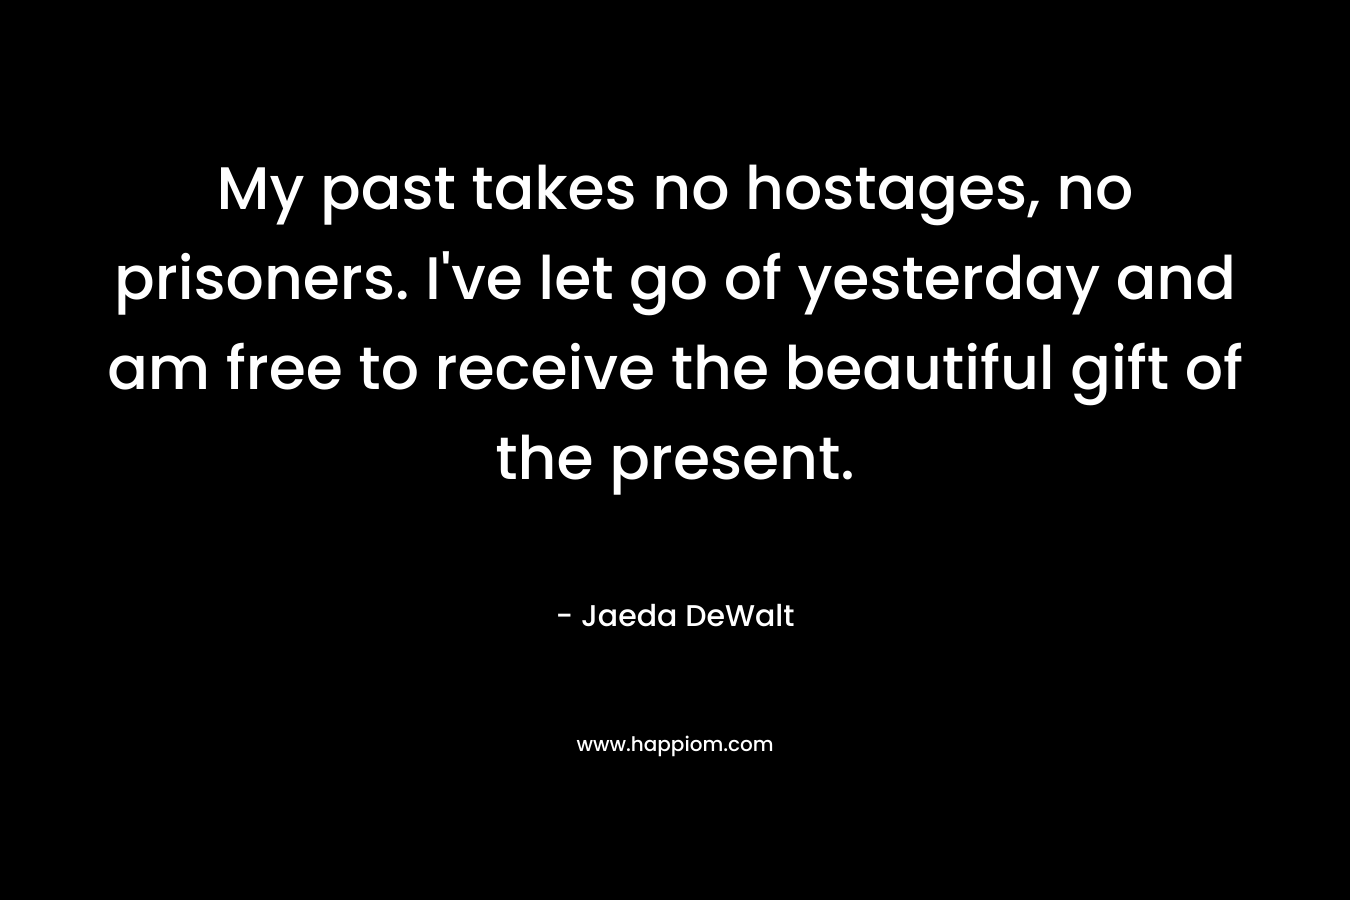 My past takes no hostages, no prisoners. I’ve let go of yesterday and am free to receive the beautiful gift of the present. – Jaeda DeWalt